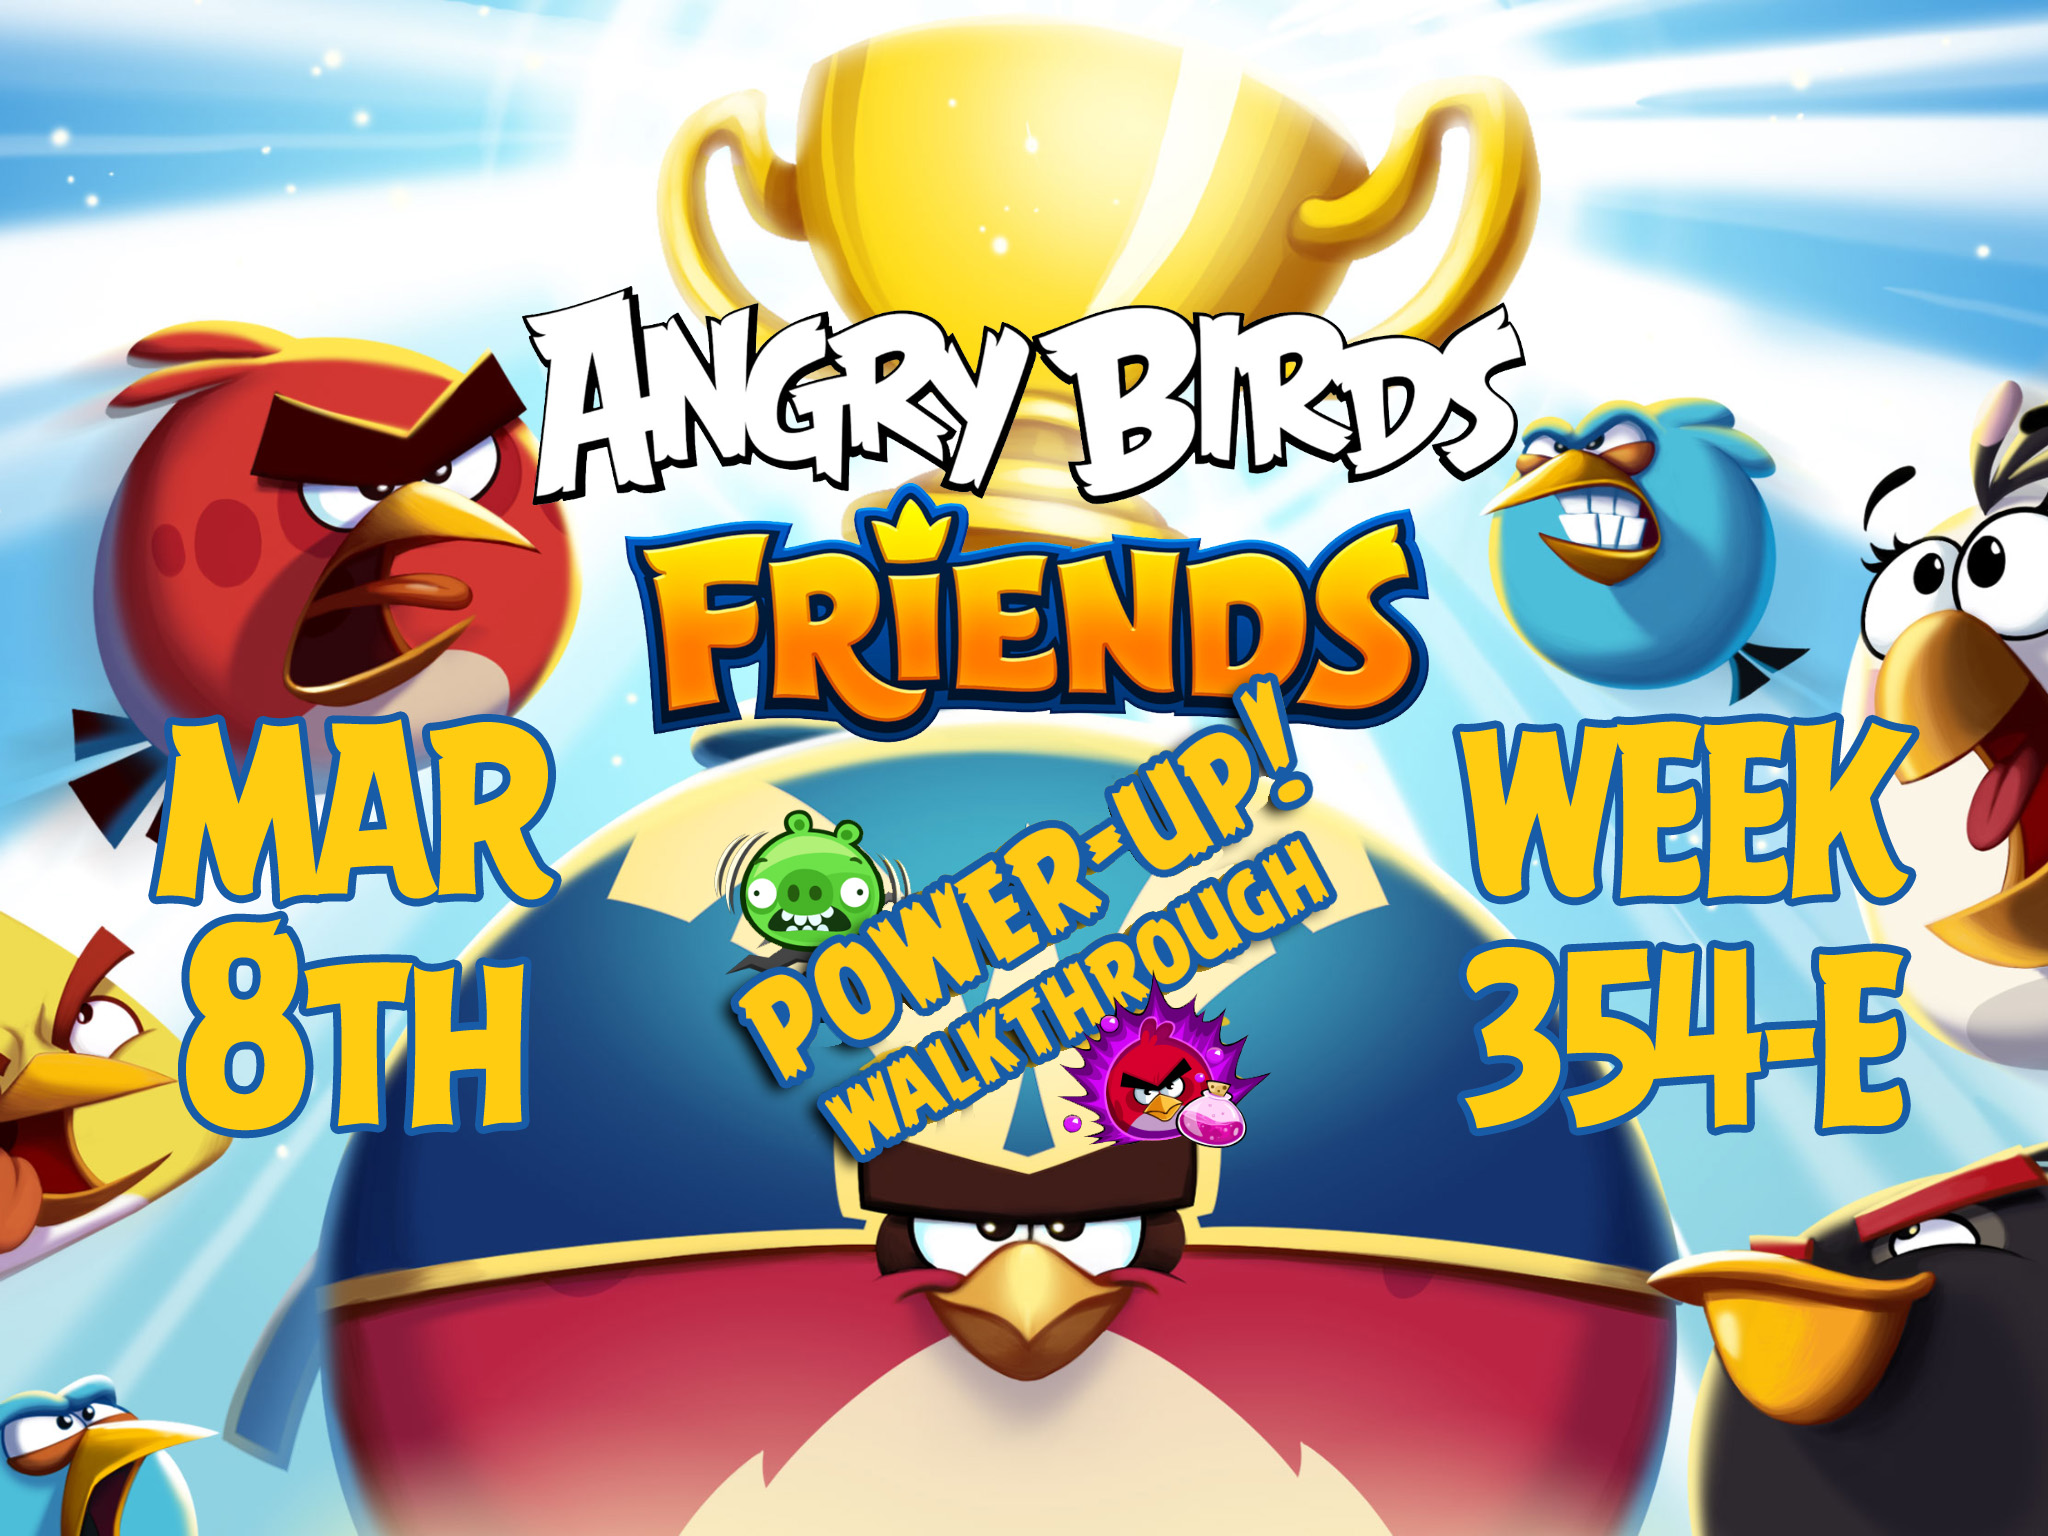 Angry-Birds-Friends-Tournament-Week-354-E-Feature-Image-PU